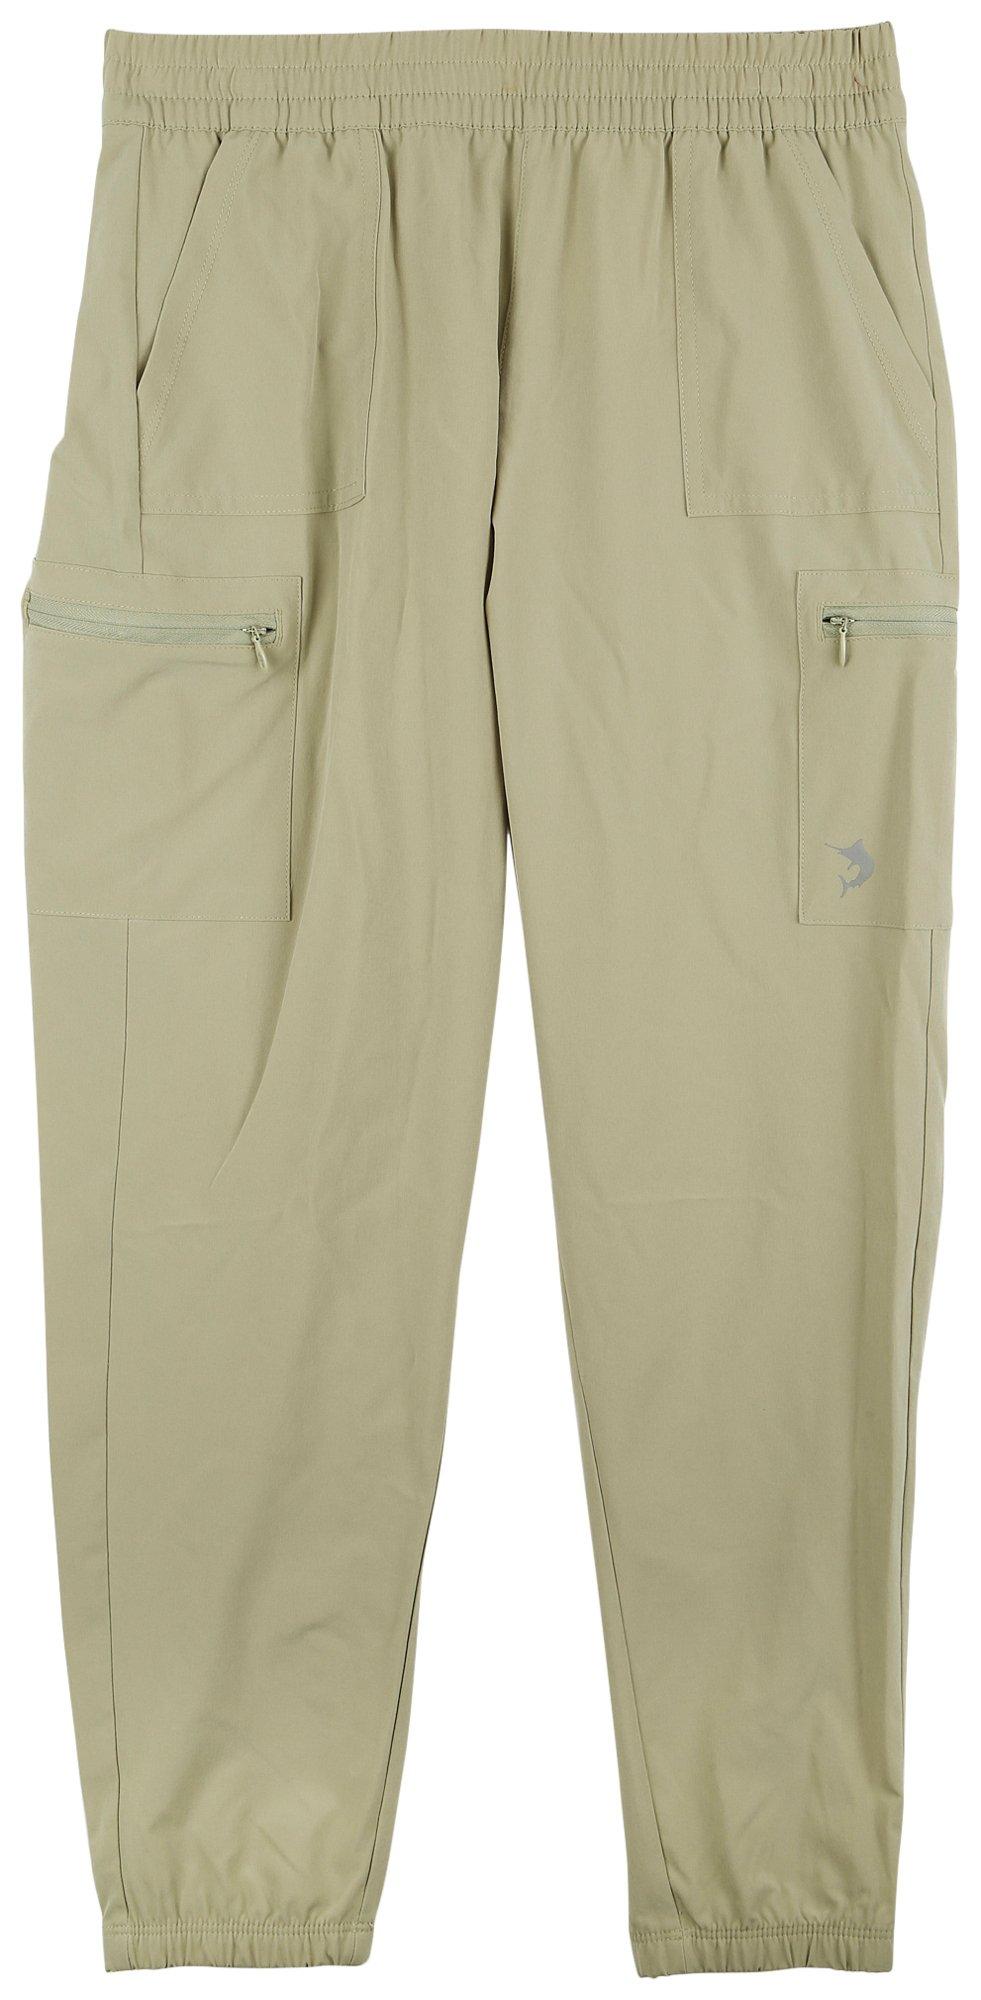 Reel Legends Big Boys Pull-On Woven Joggers